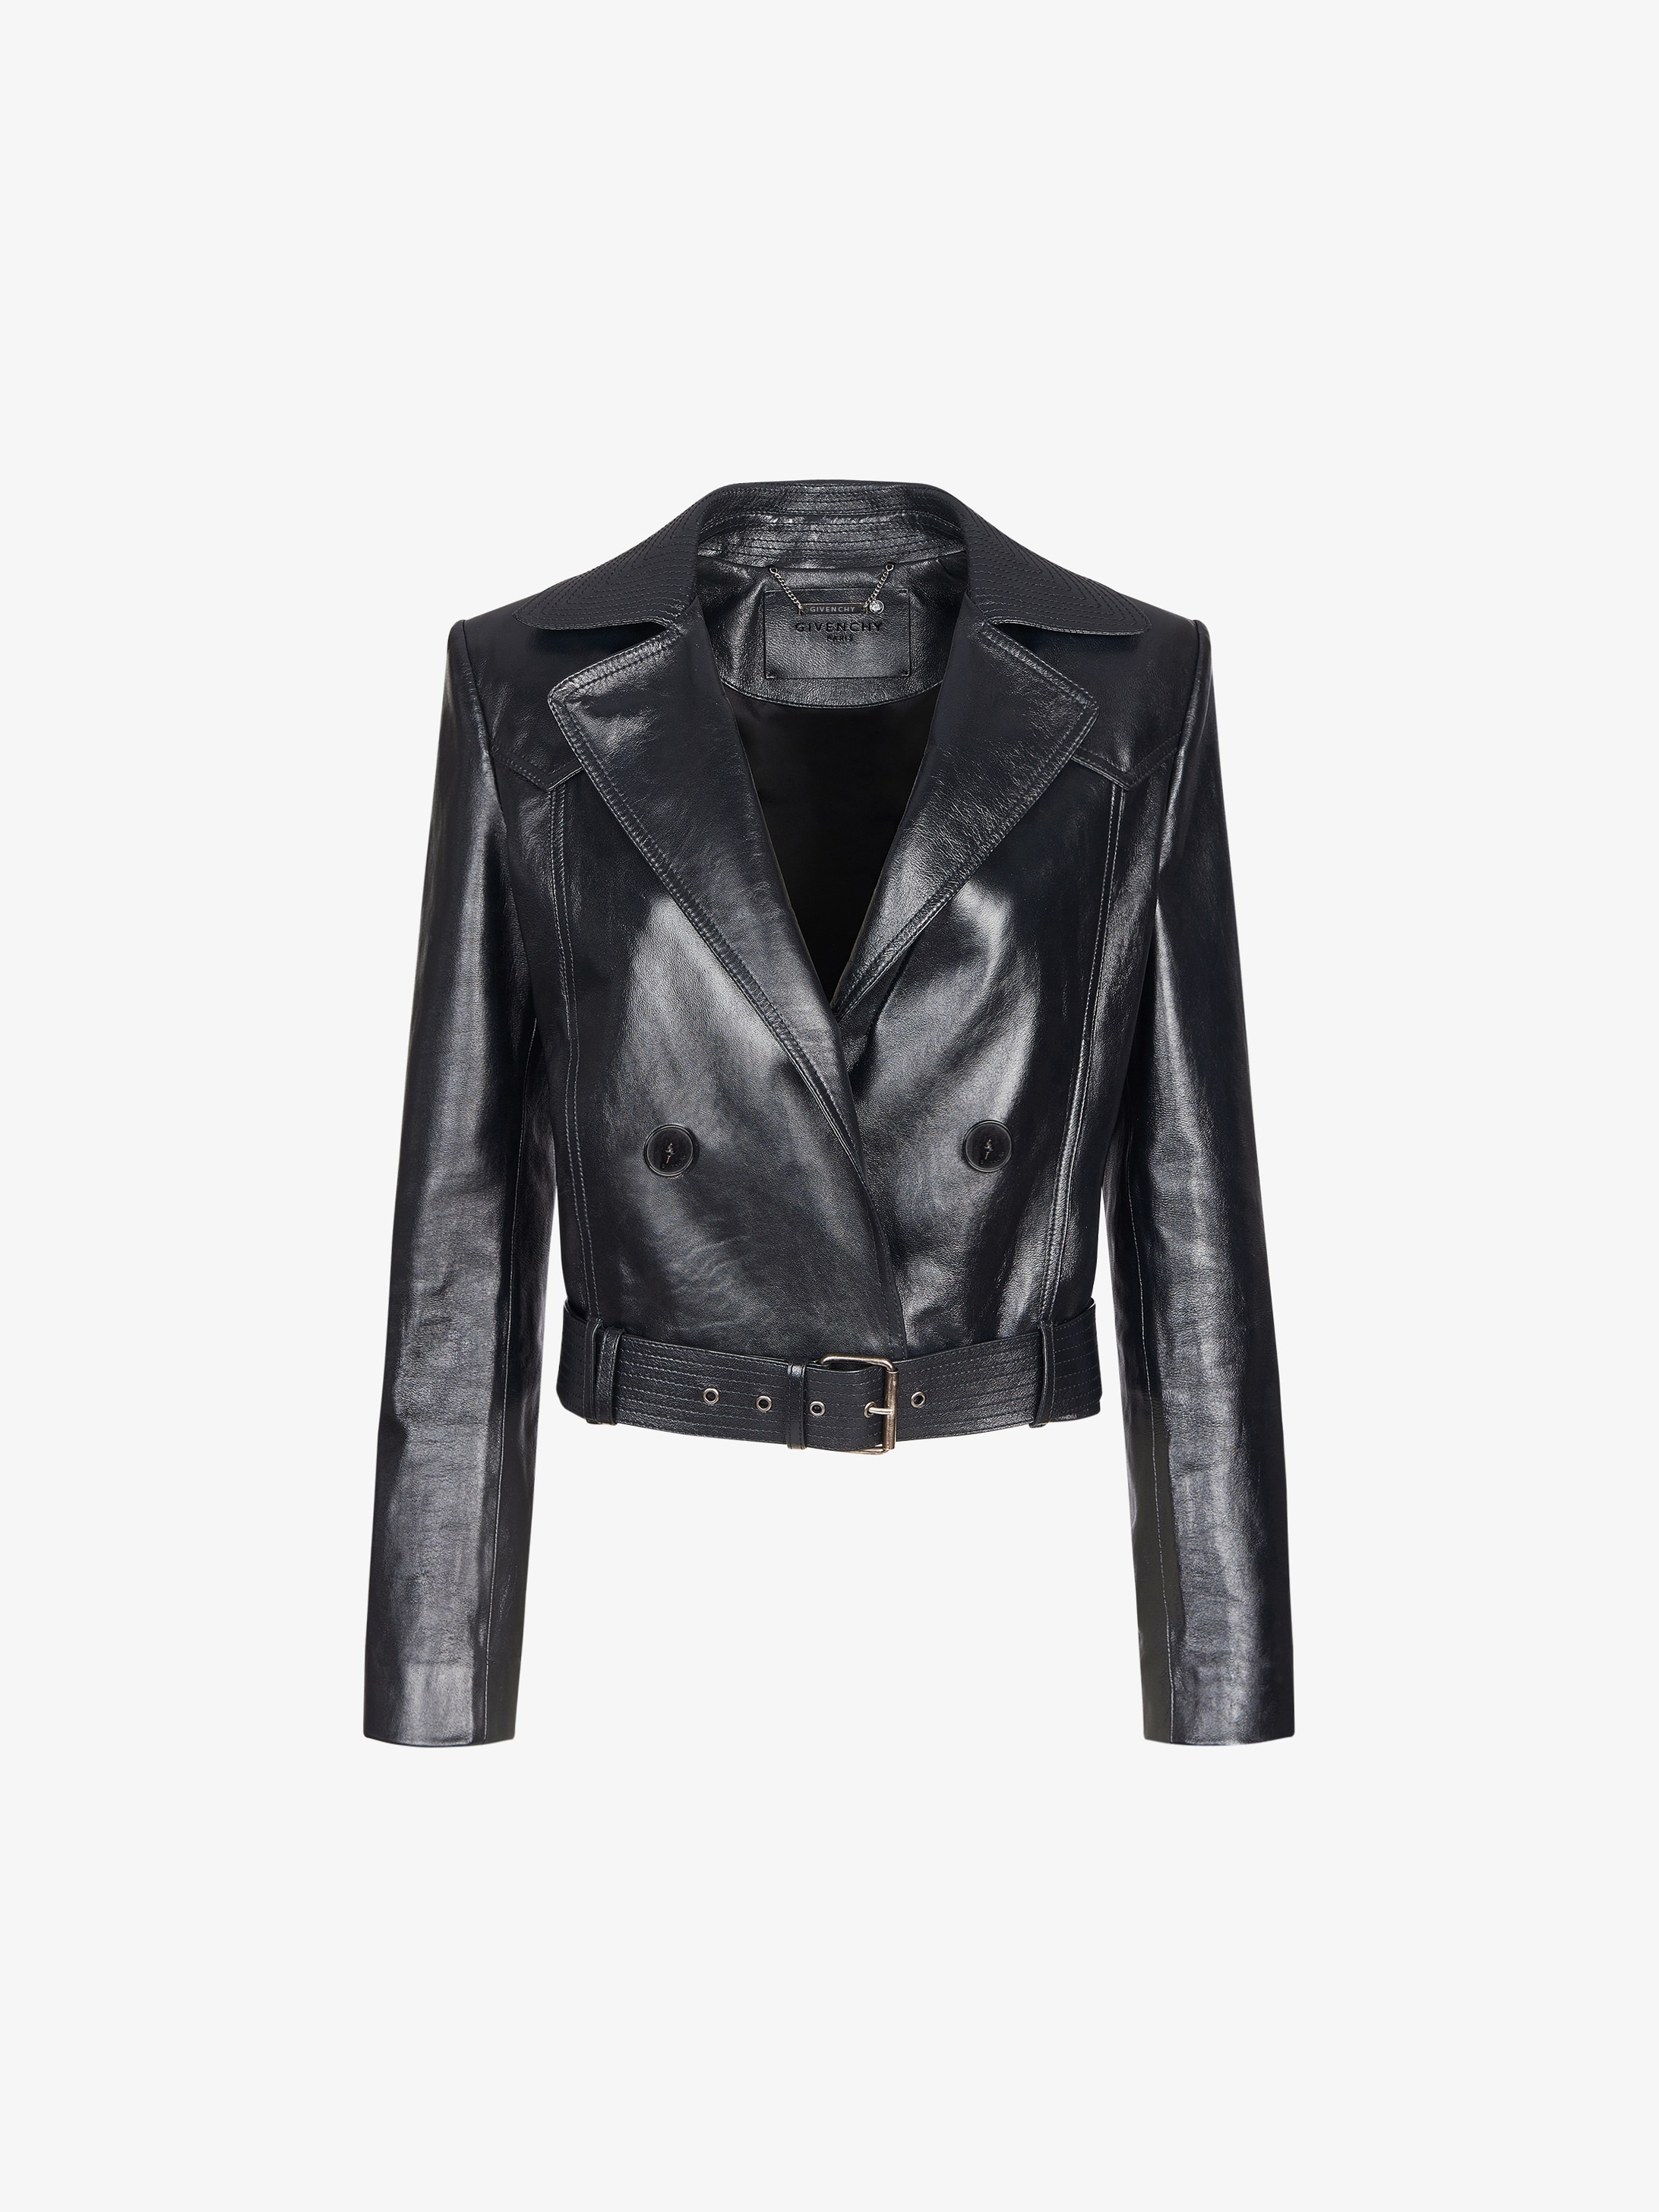 Leather jacket with belt | GIVENCHY Paris